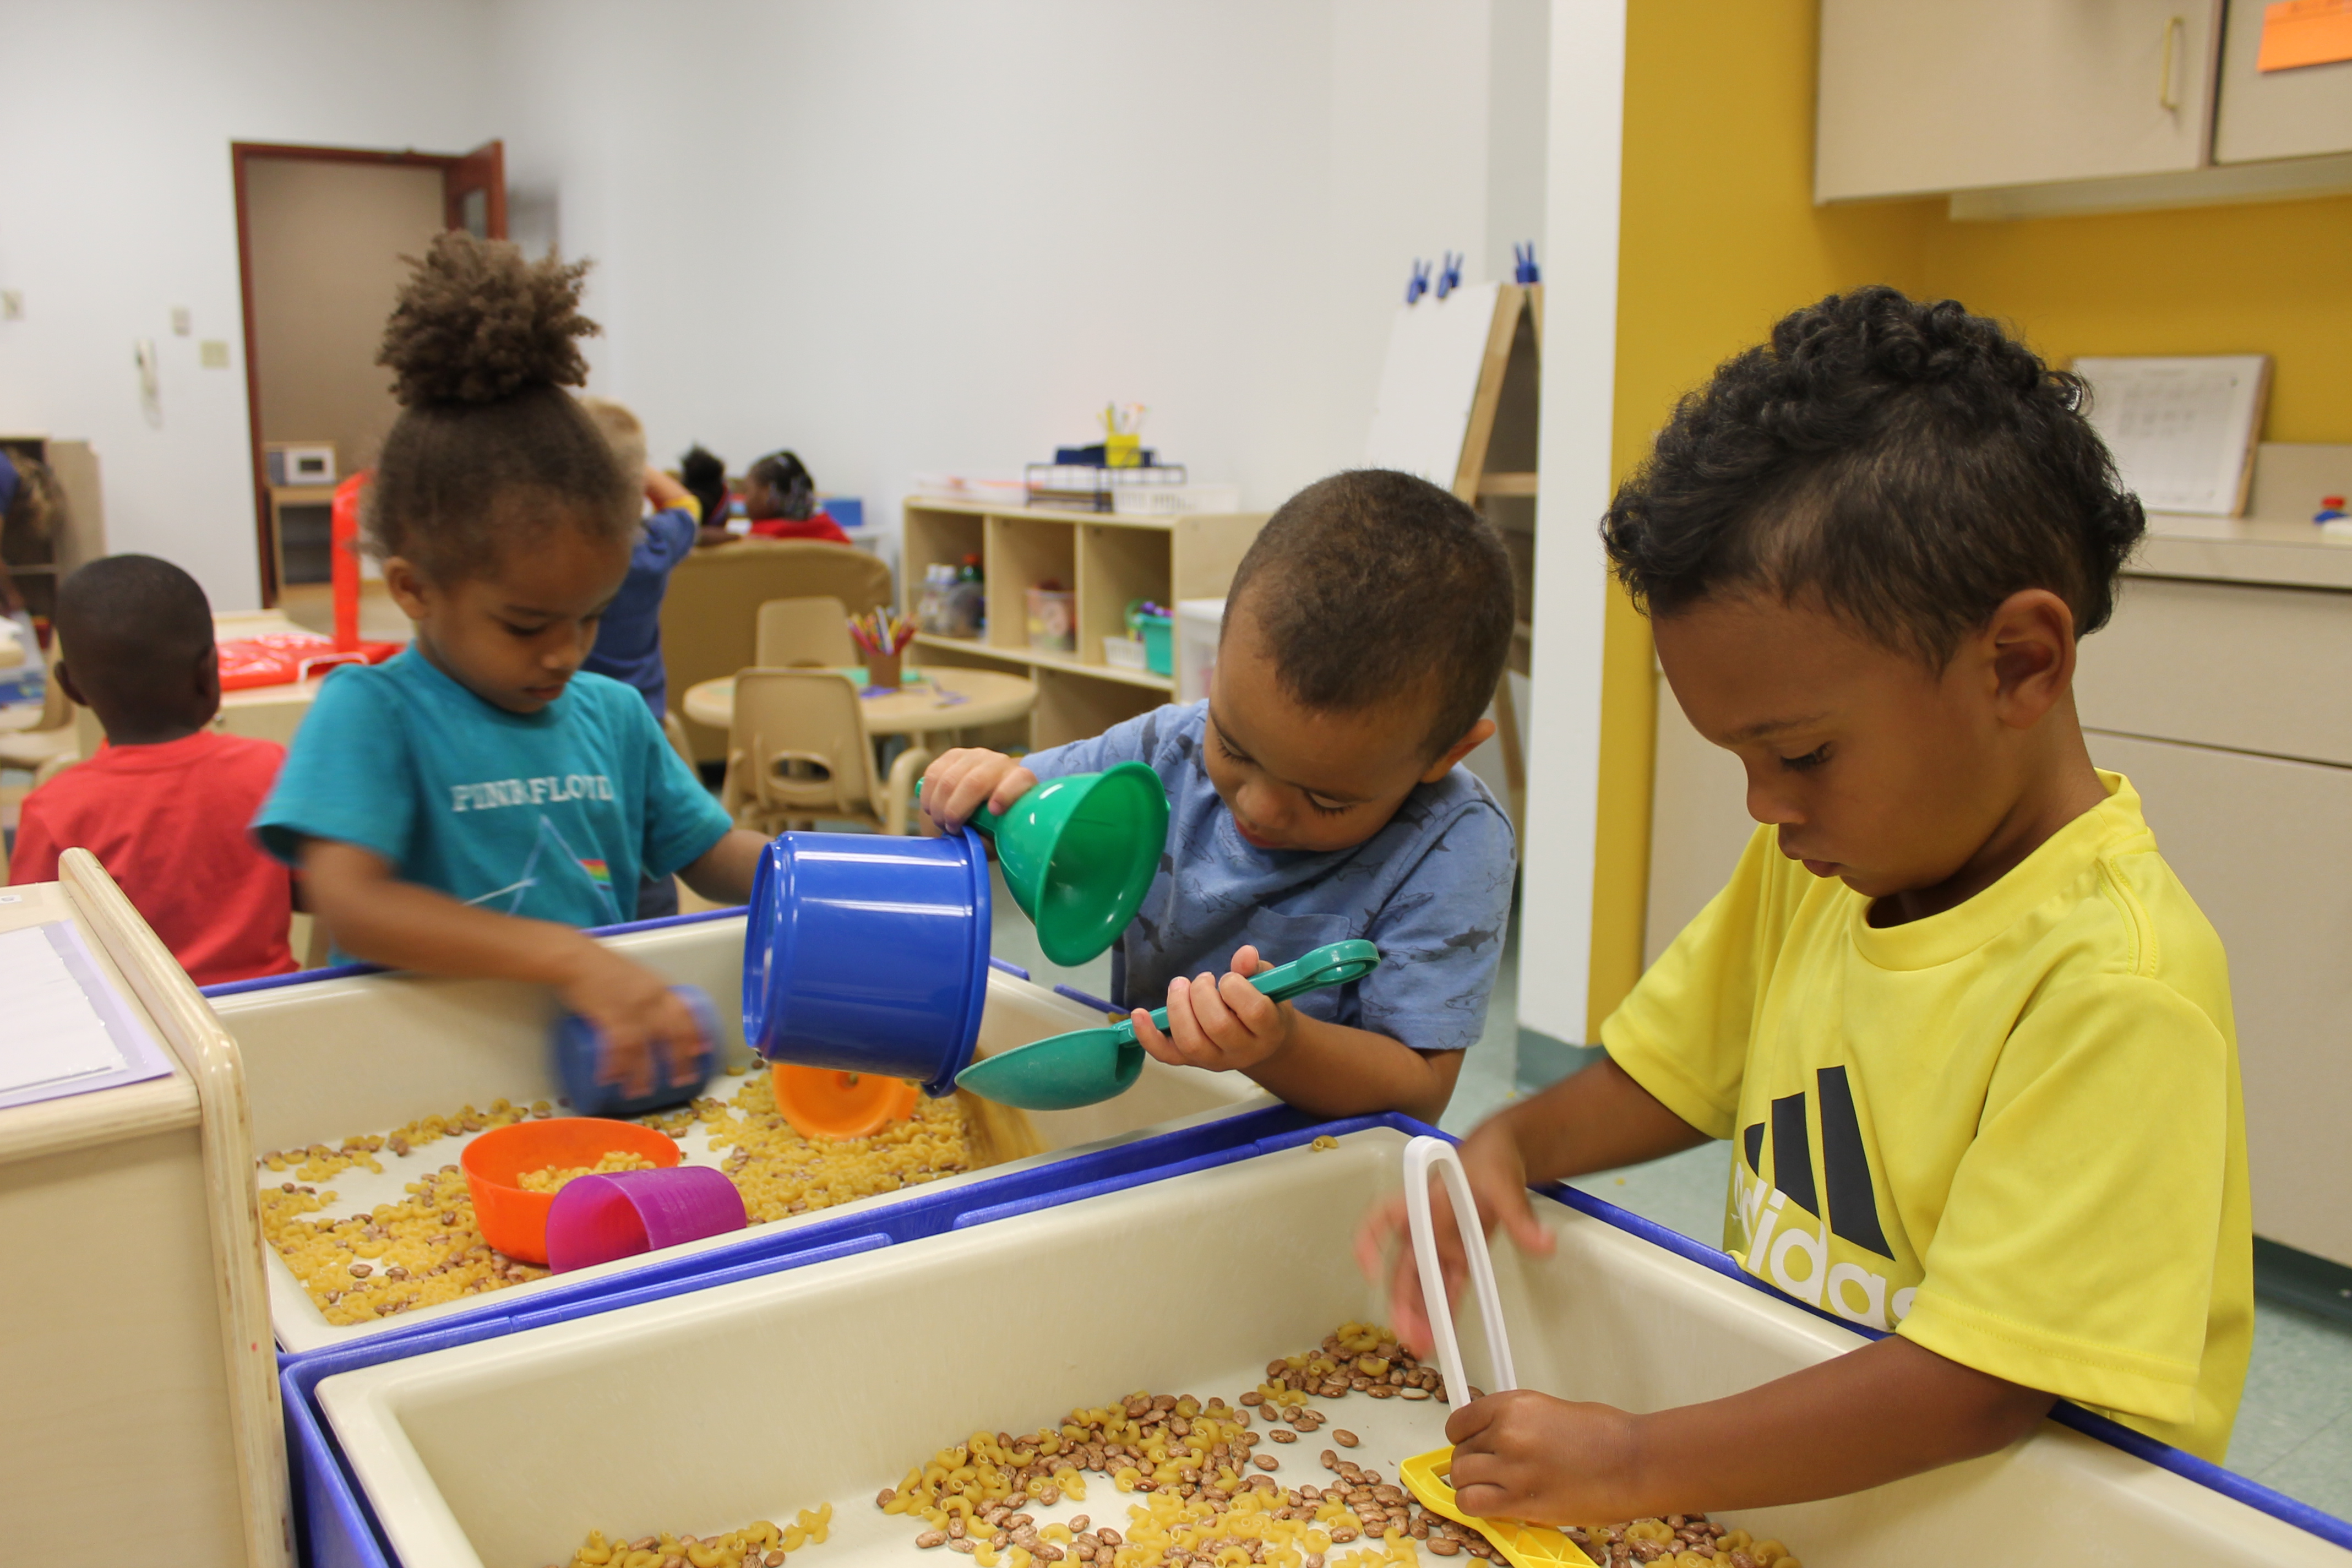 Preschool students play with beans and dried pasta at a sensory center in a preschool classroom at Day Early Learning at Eastern Star Church.